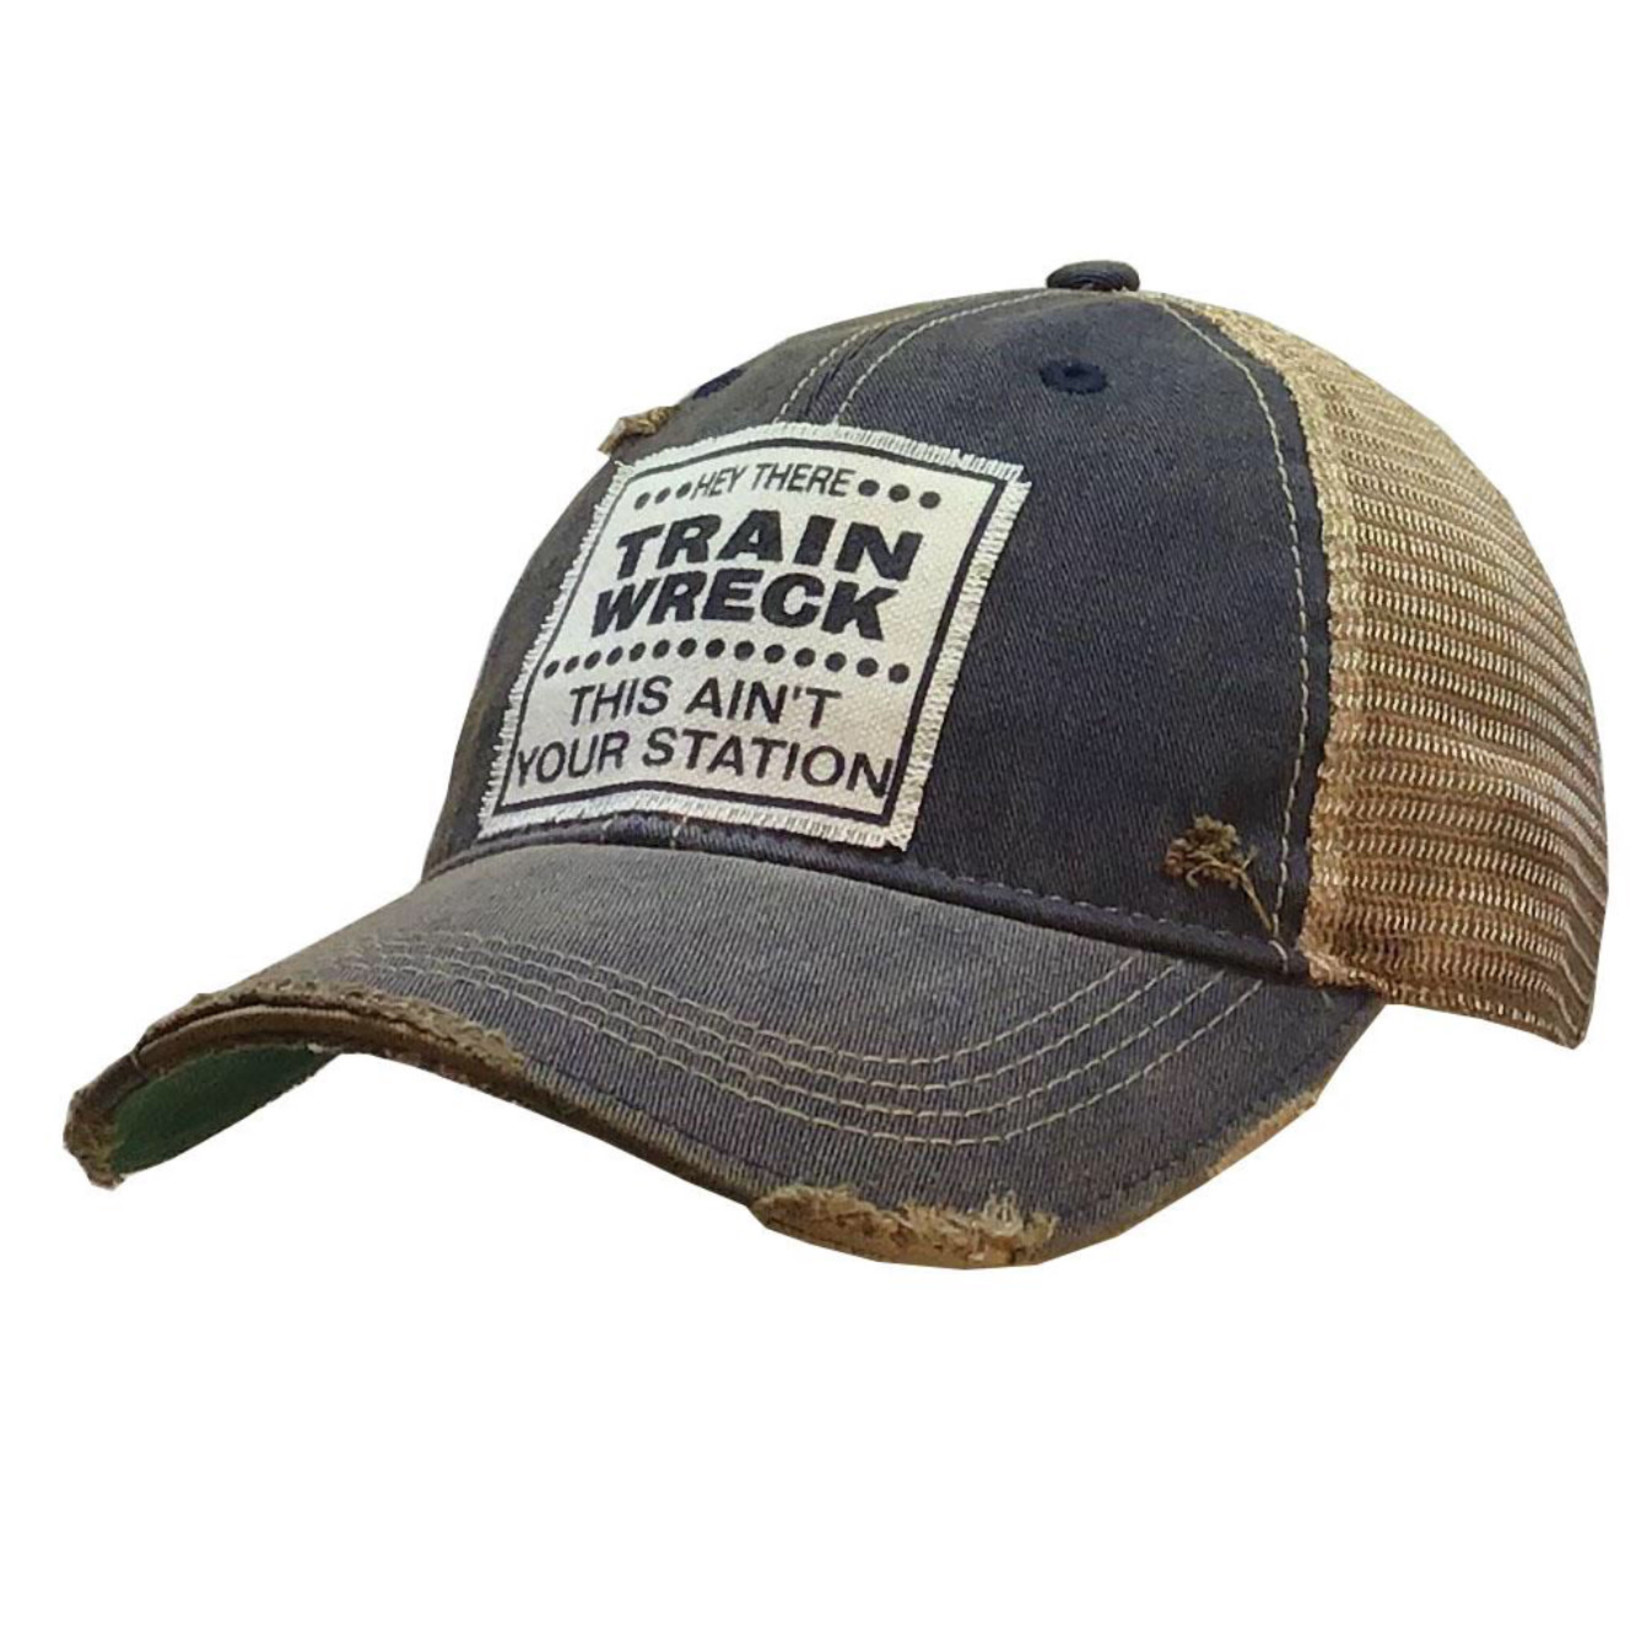 Vintage Life “Hey There Train Wreck This Ain’t Your Station” Distressed Trucker Cap - Dark Blue